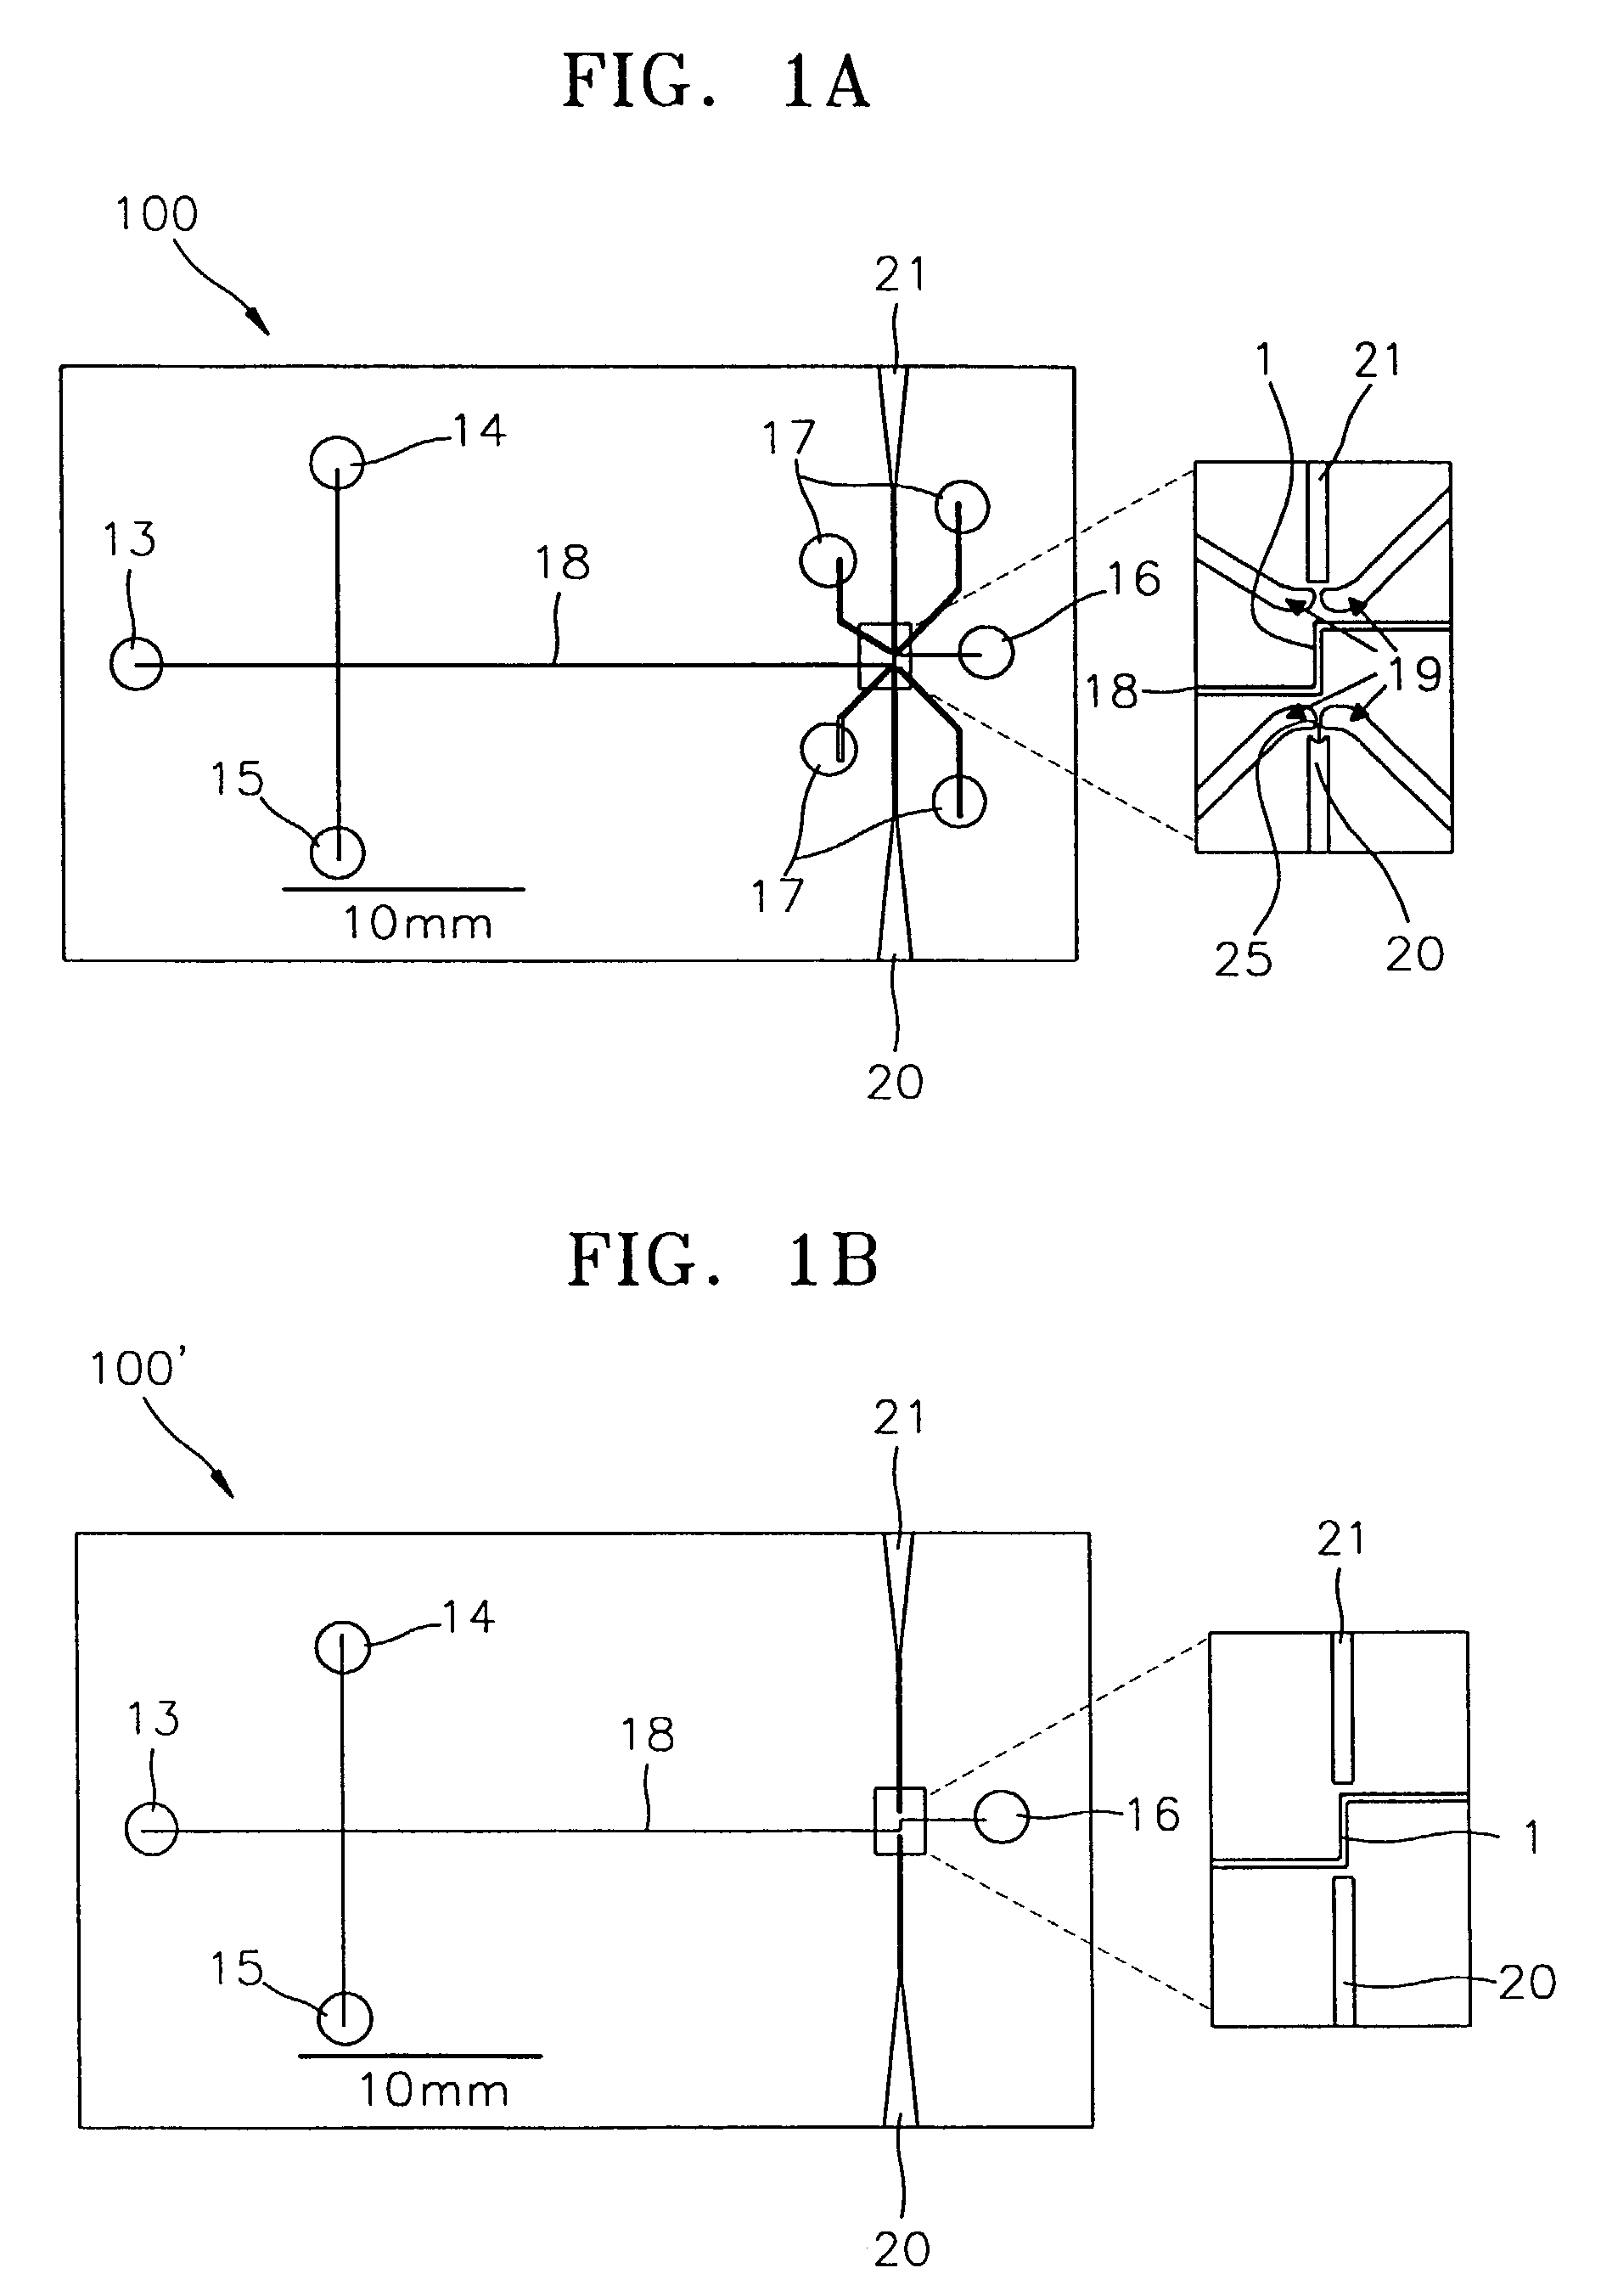 Absorbance detection system for lab-on-a-chip